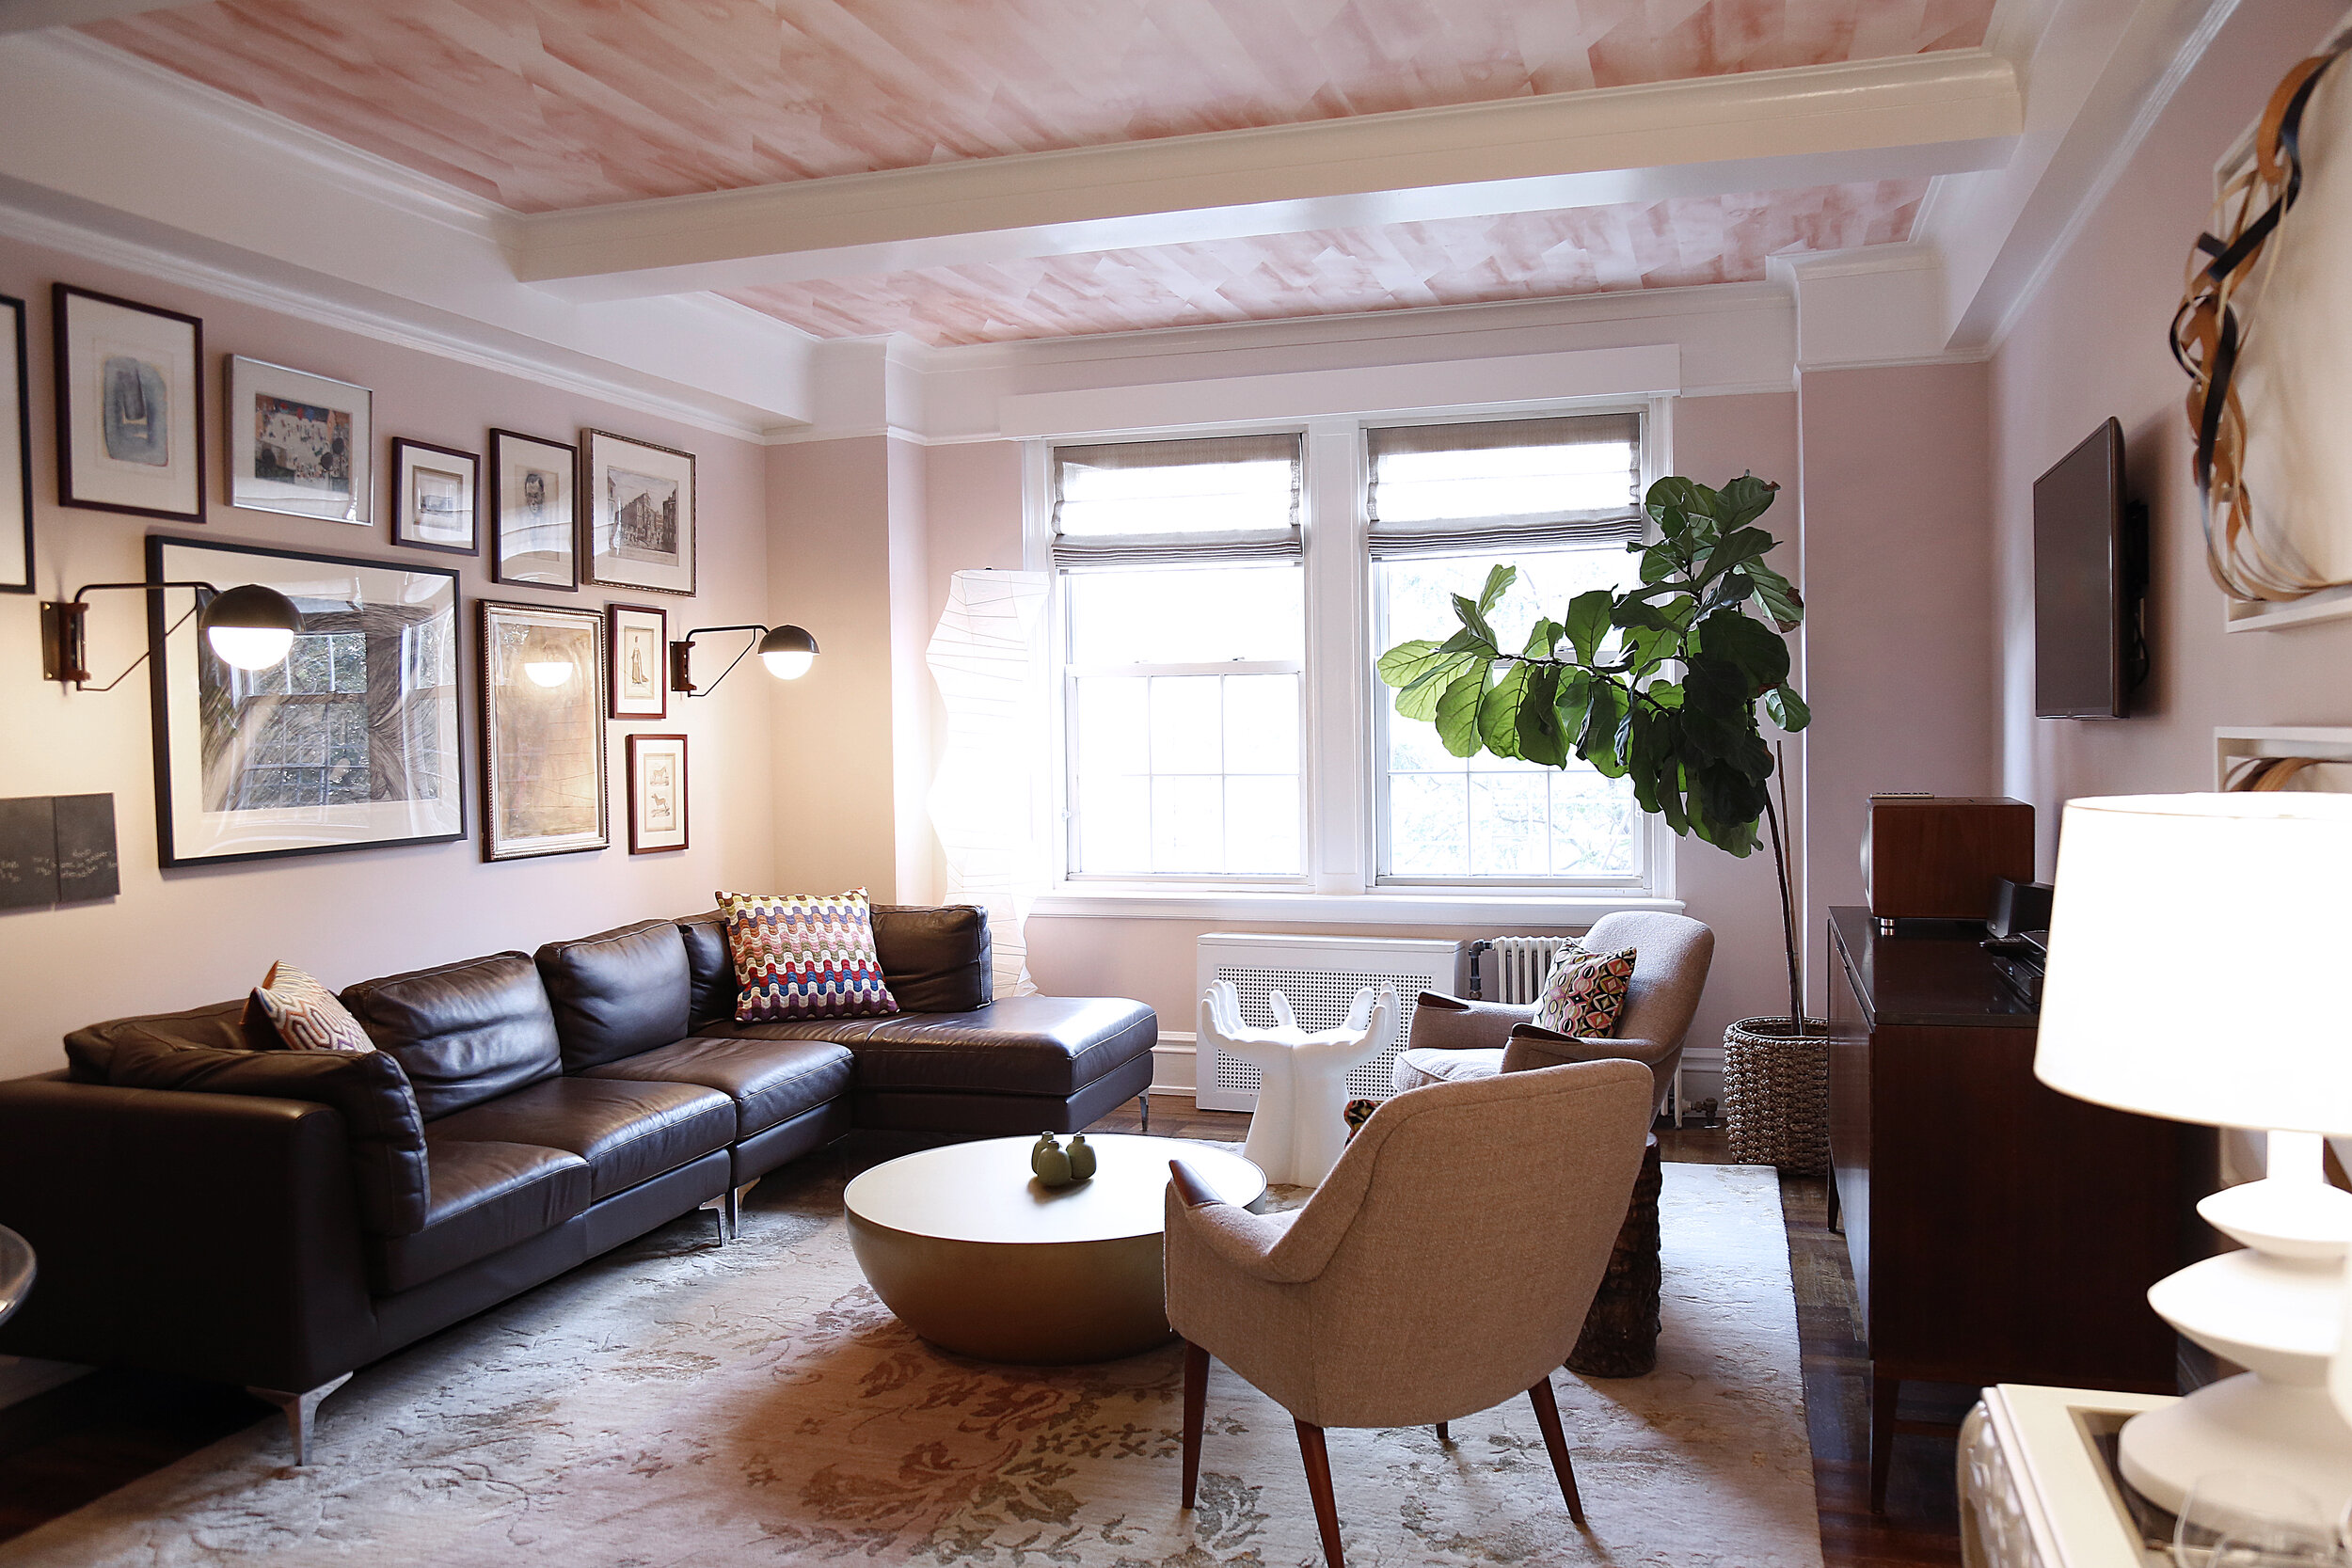 Modern living room with mauve walls and wallpaper ceiling, brown leather sectional and vintage furniture